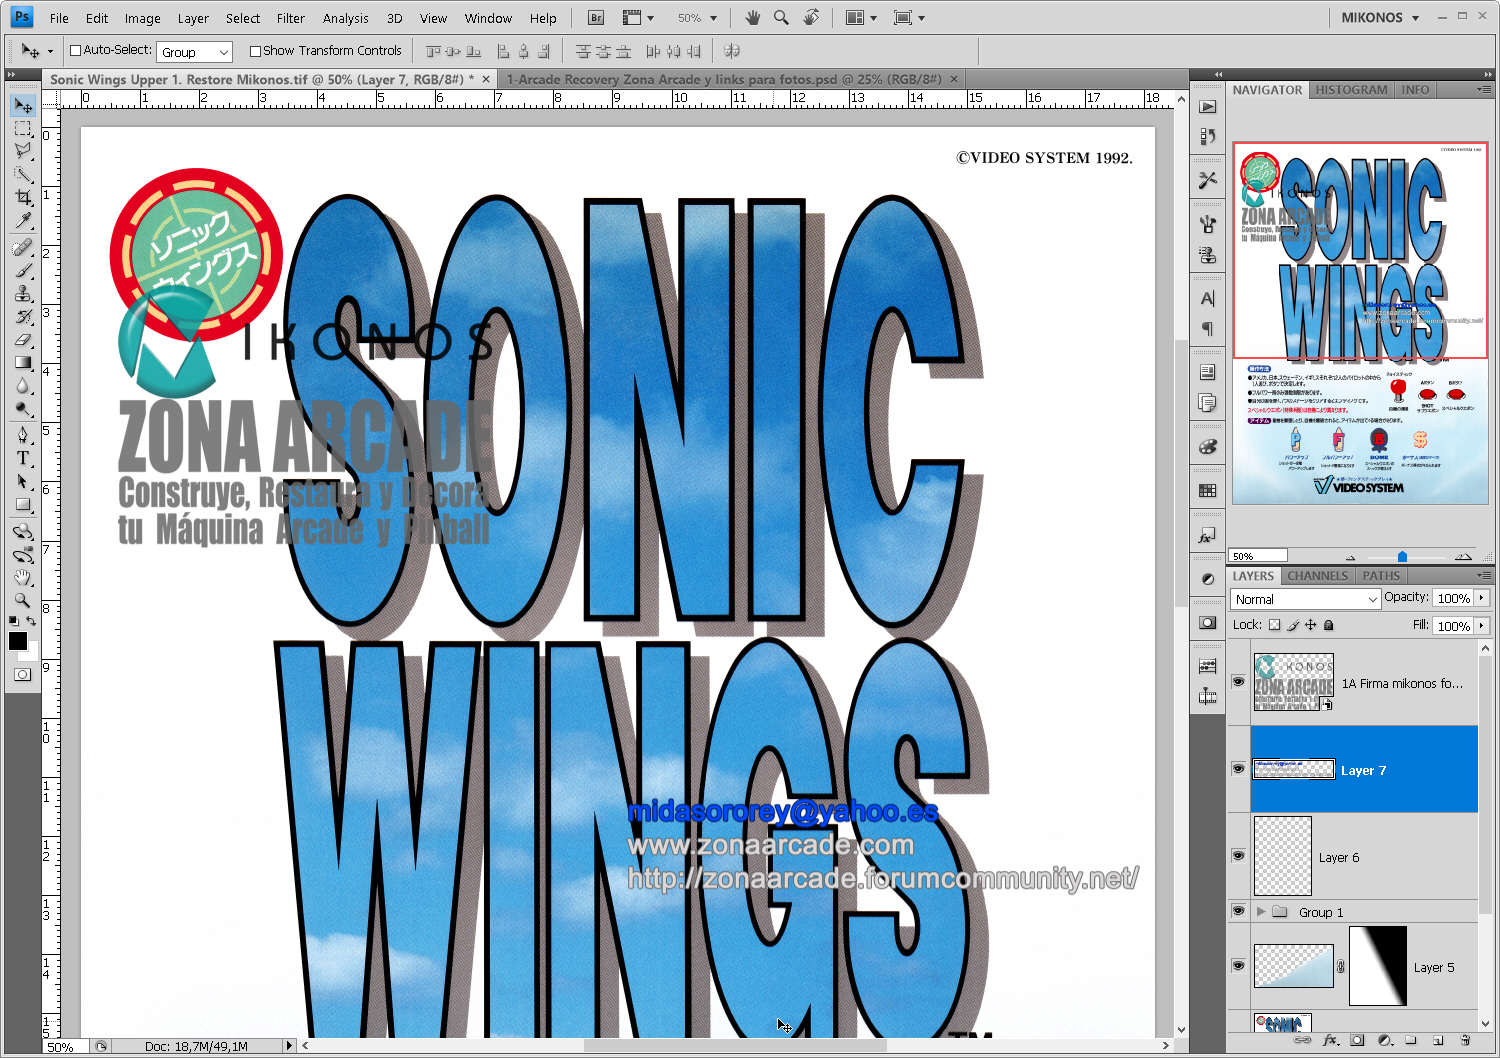 Sonic-Wings-Upper-Flyer-Marquee-1-Restored-Mikonos2